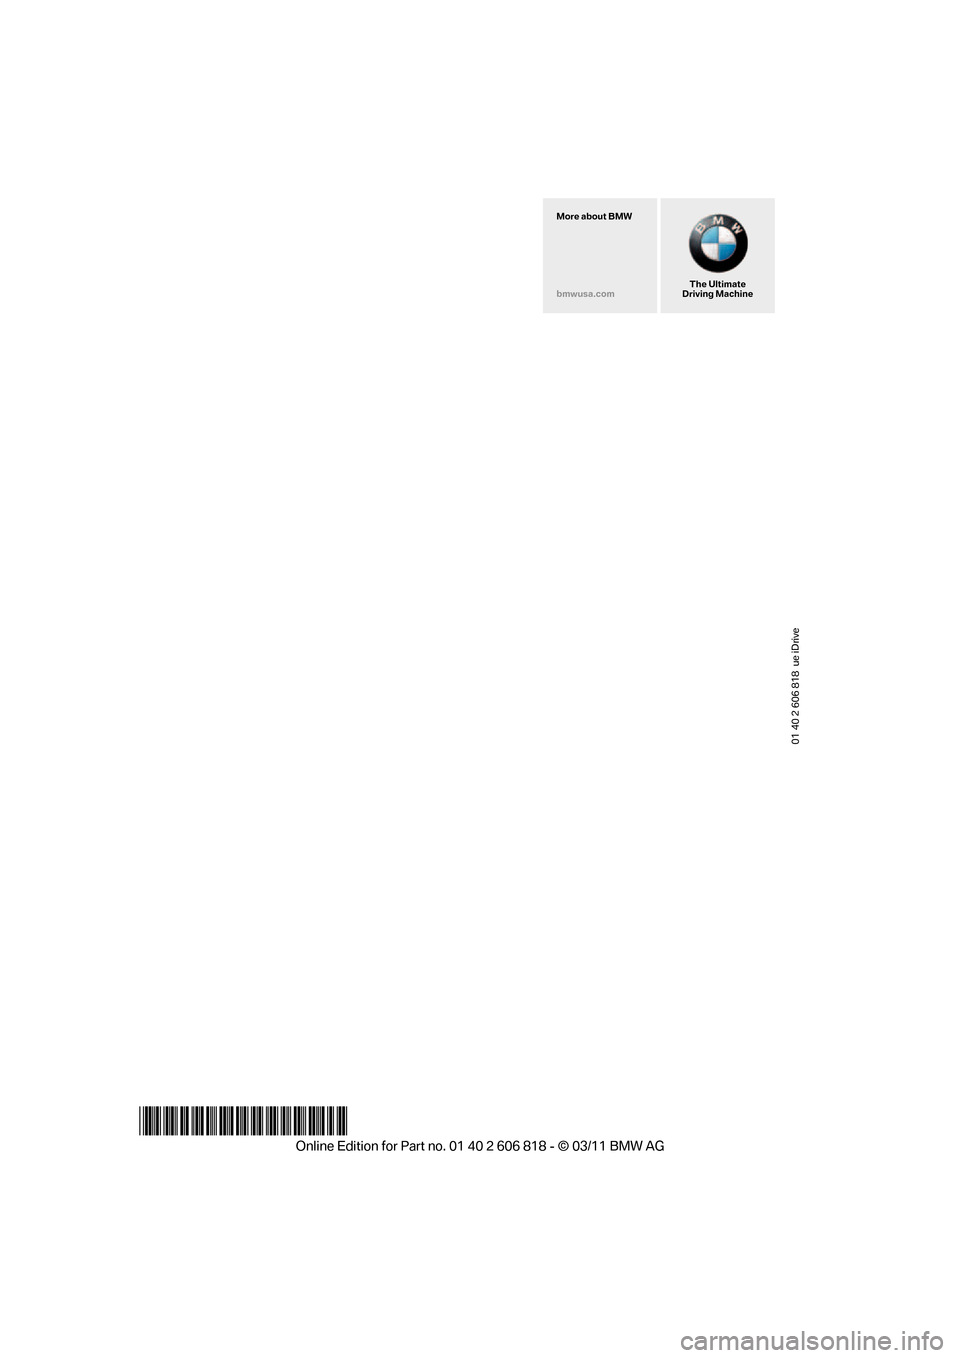 BMW 128I 2012 E88 Owners Manual 01 40 2 606 818  ue iDrive
*BL260681800D*
The Ultimate
Driving Machine More about BMW
bmwusa.com 